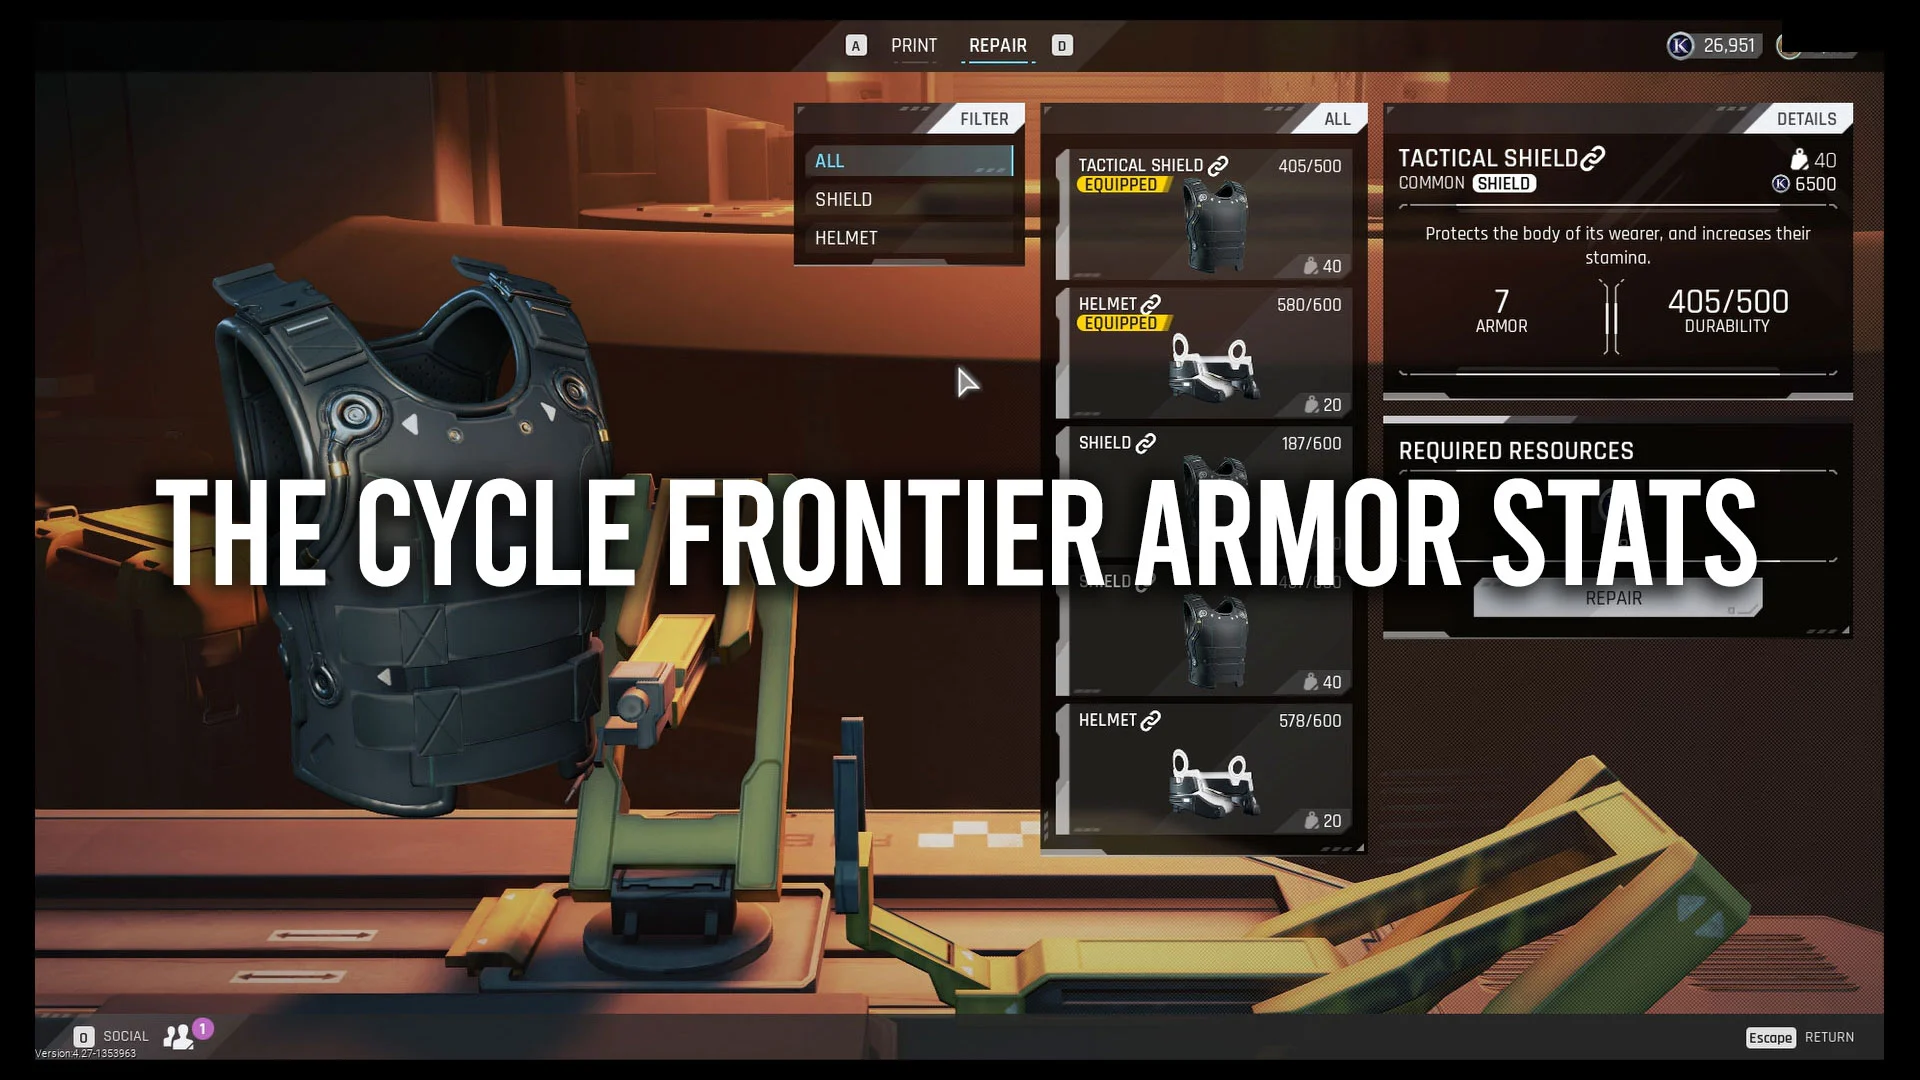 The Cycle Frontier Armor Stats